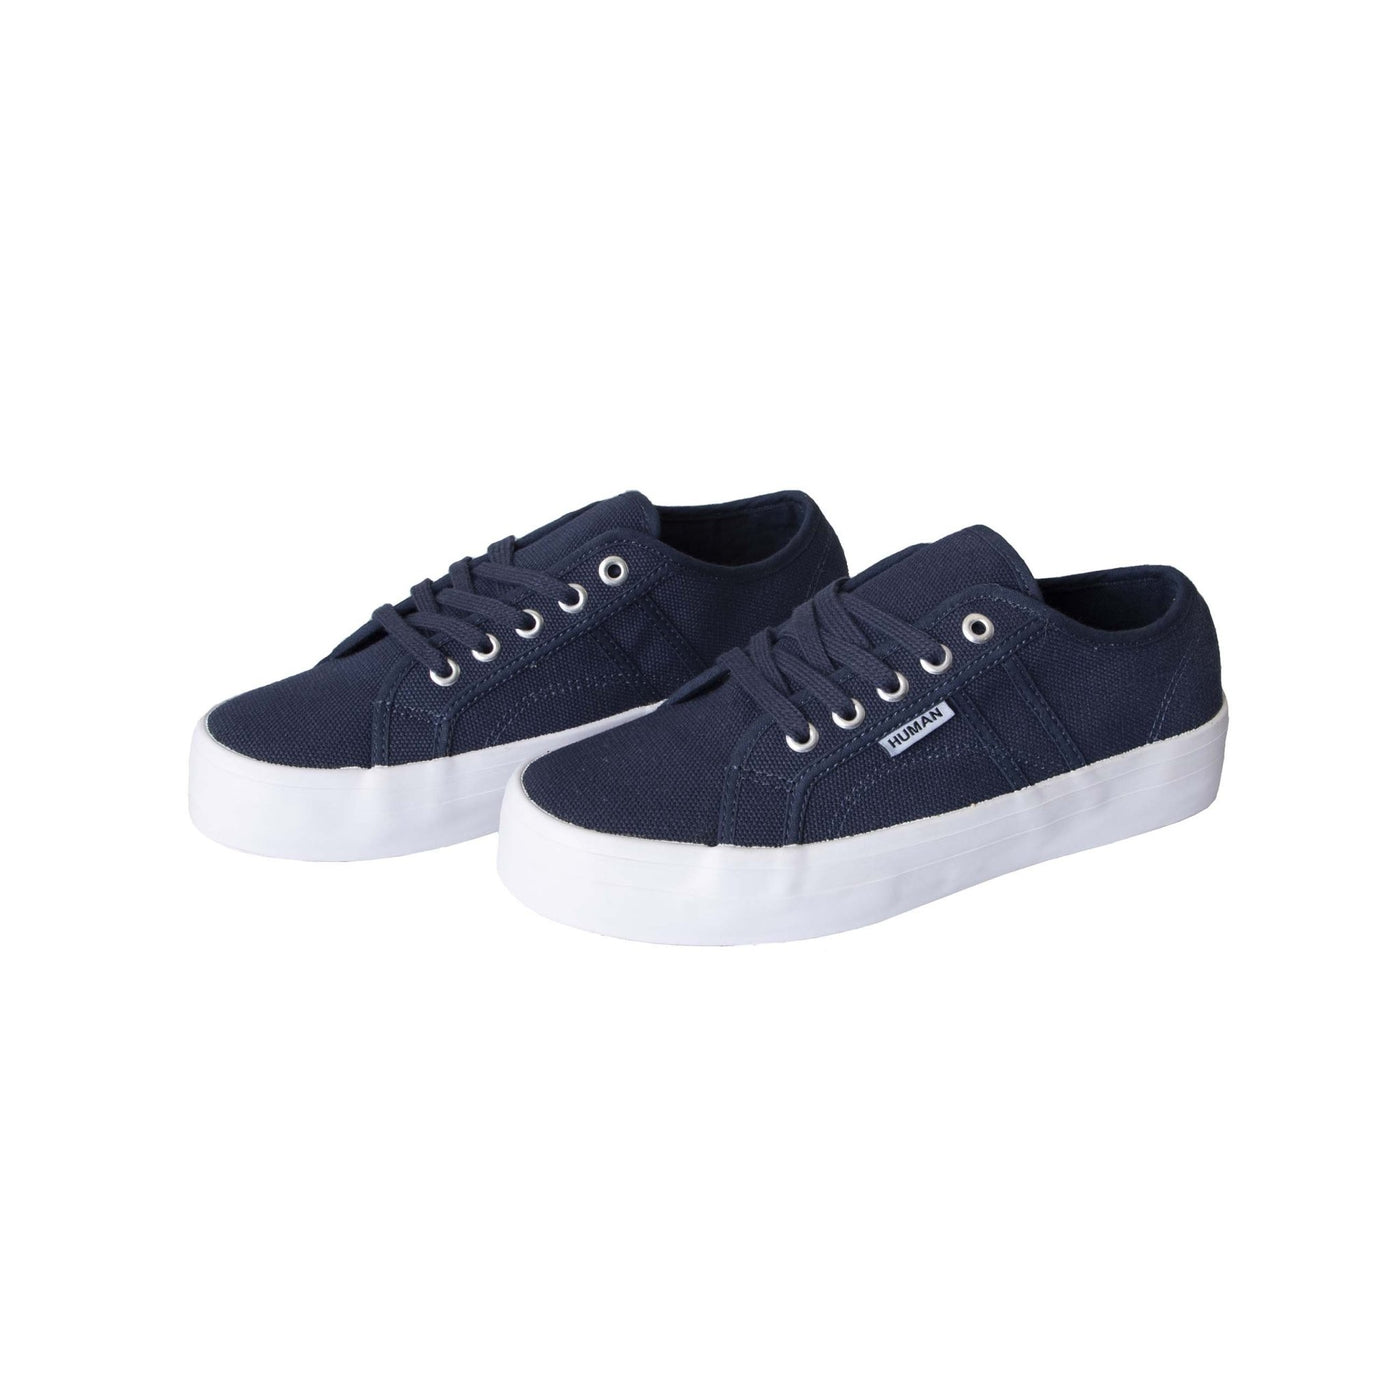 Human Shoes Lift Canvas Shoe in Navy - Hey Sara